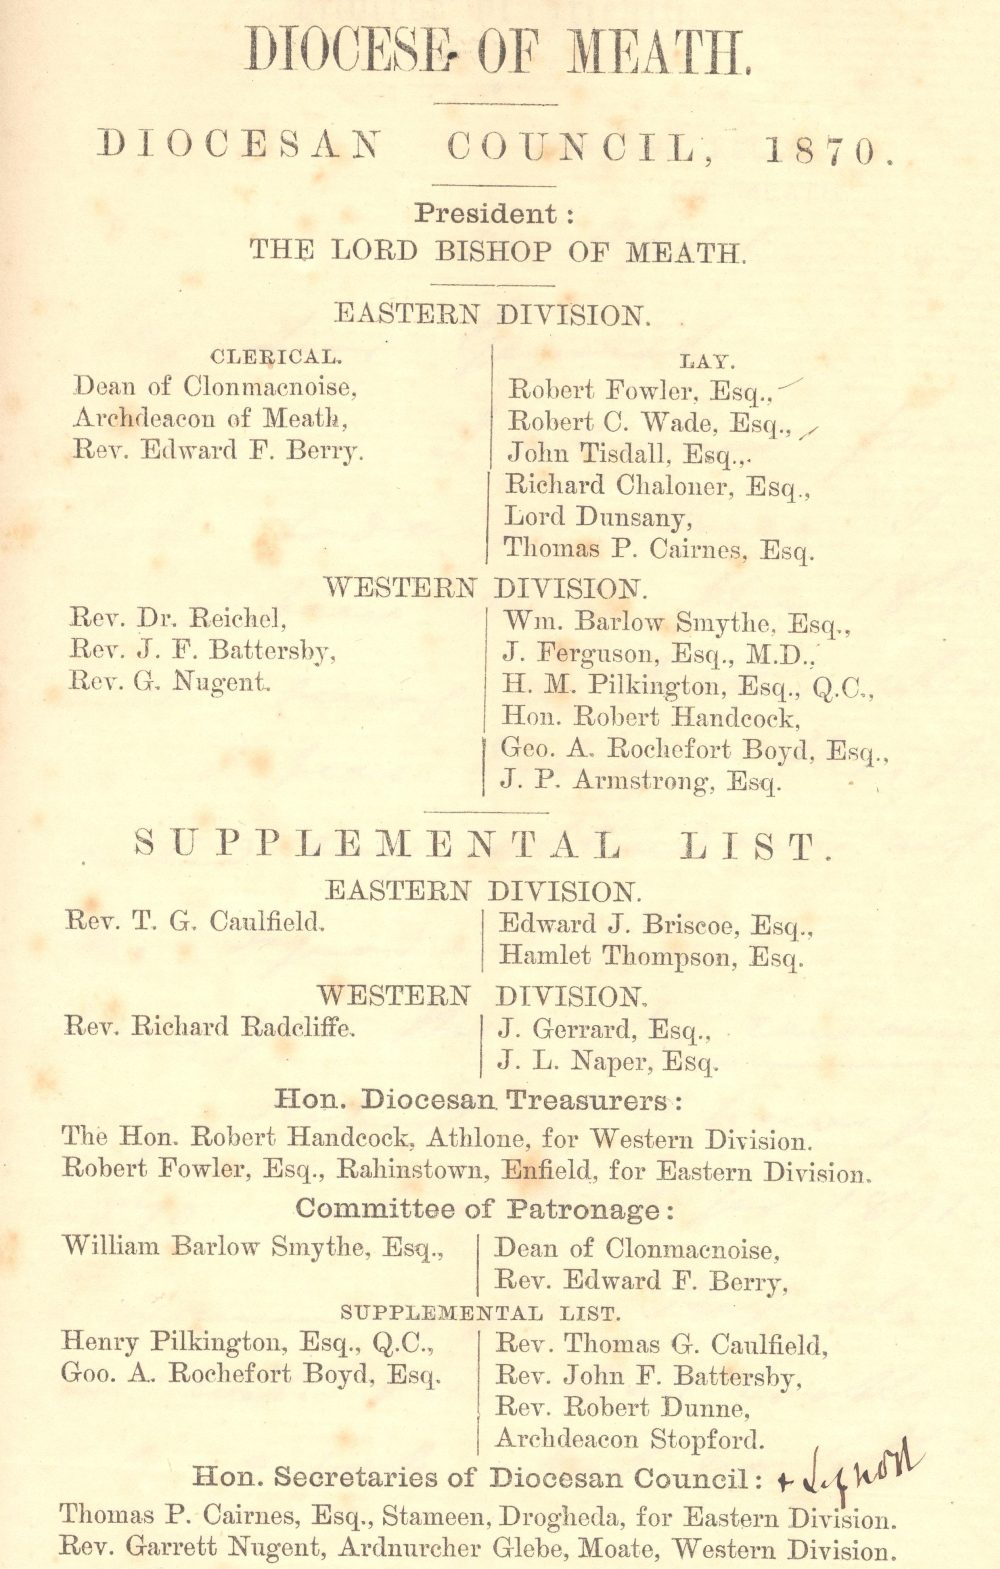 Members of the Diocesan Council in 1870 from RCB Library D7/5/5/9/1